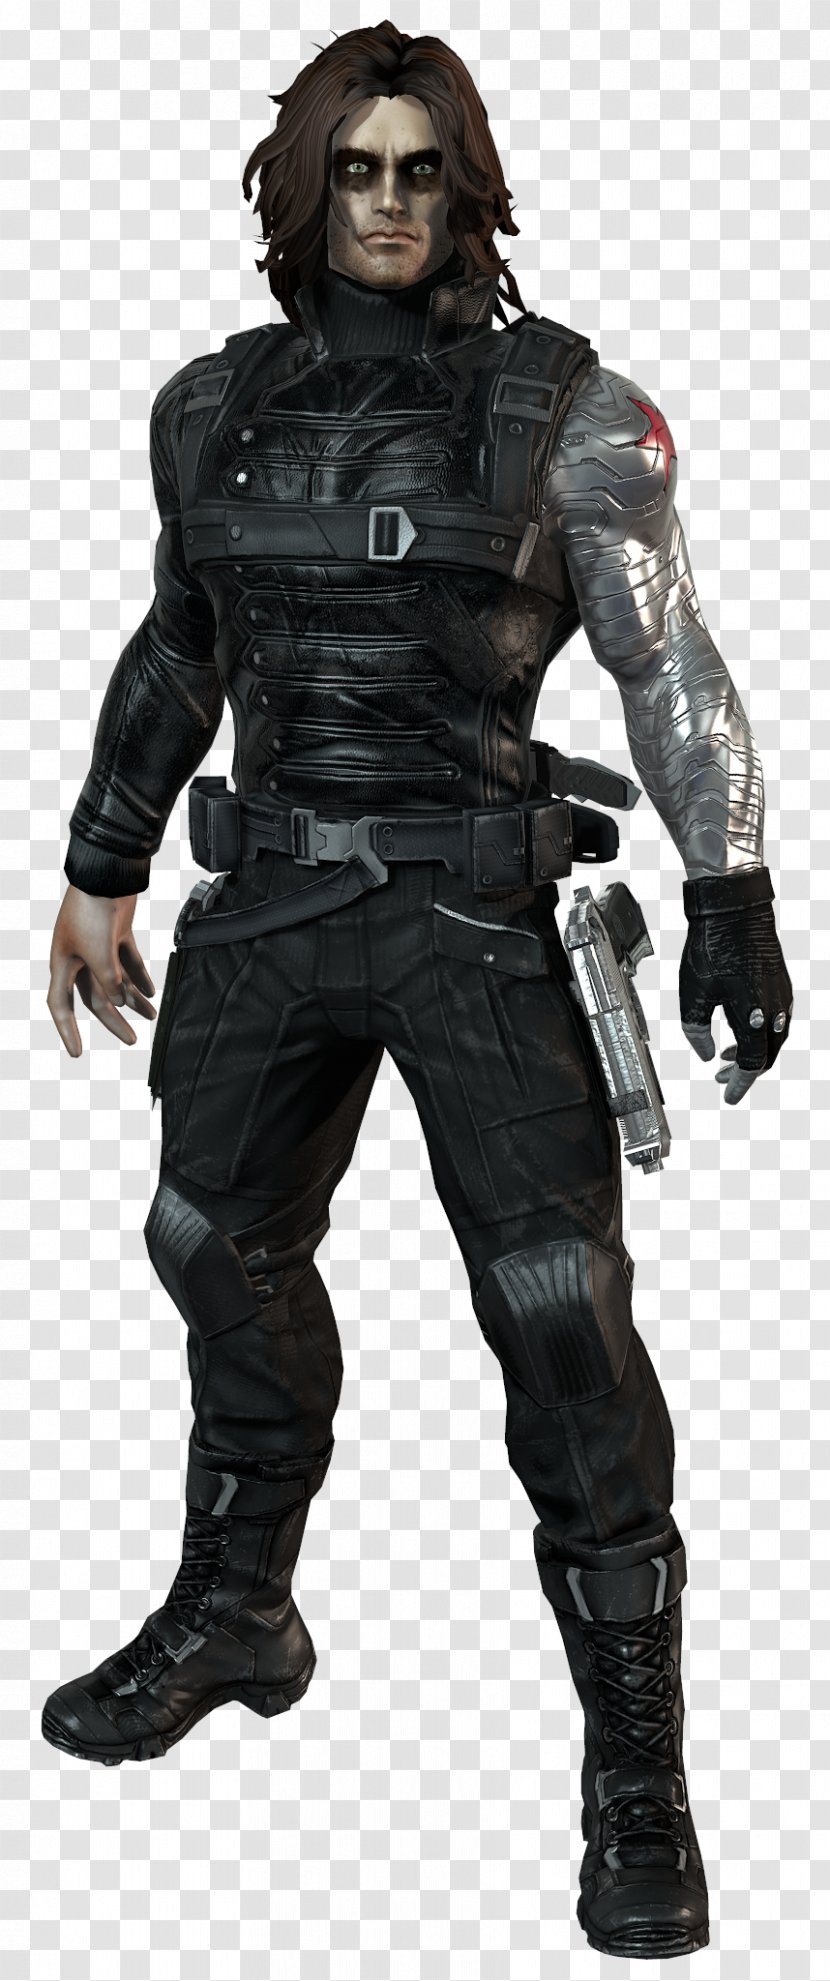 Captain America: The Winter Soldier Marvel Heroes 2016 Bucky Barnes Black Widow - Star Of David Transparent PNG